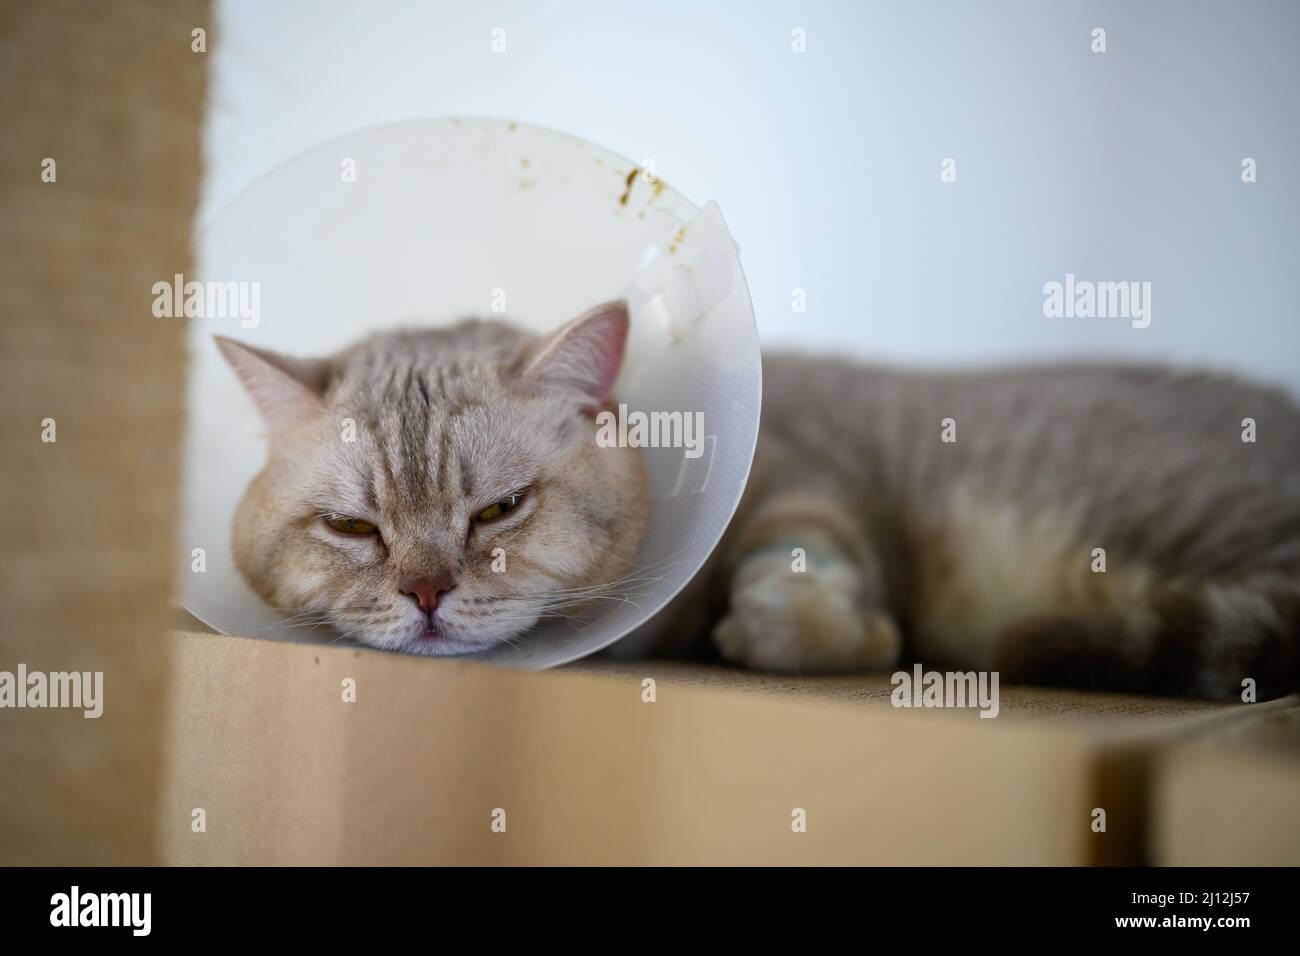 Young cat wears plastic collar to prevent licking, sleepy tabby It's sleeping on a cardboard box, Poor Sick Cat is tired of wearing a collar on its ne Stock Photo